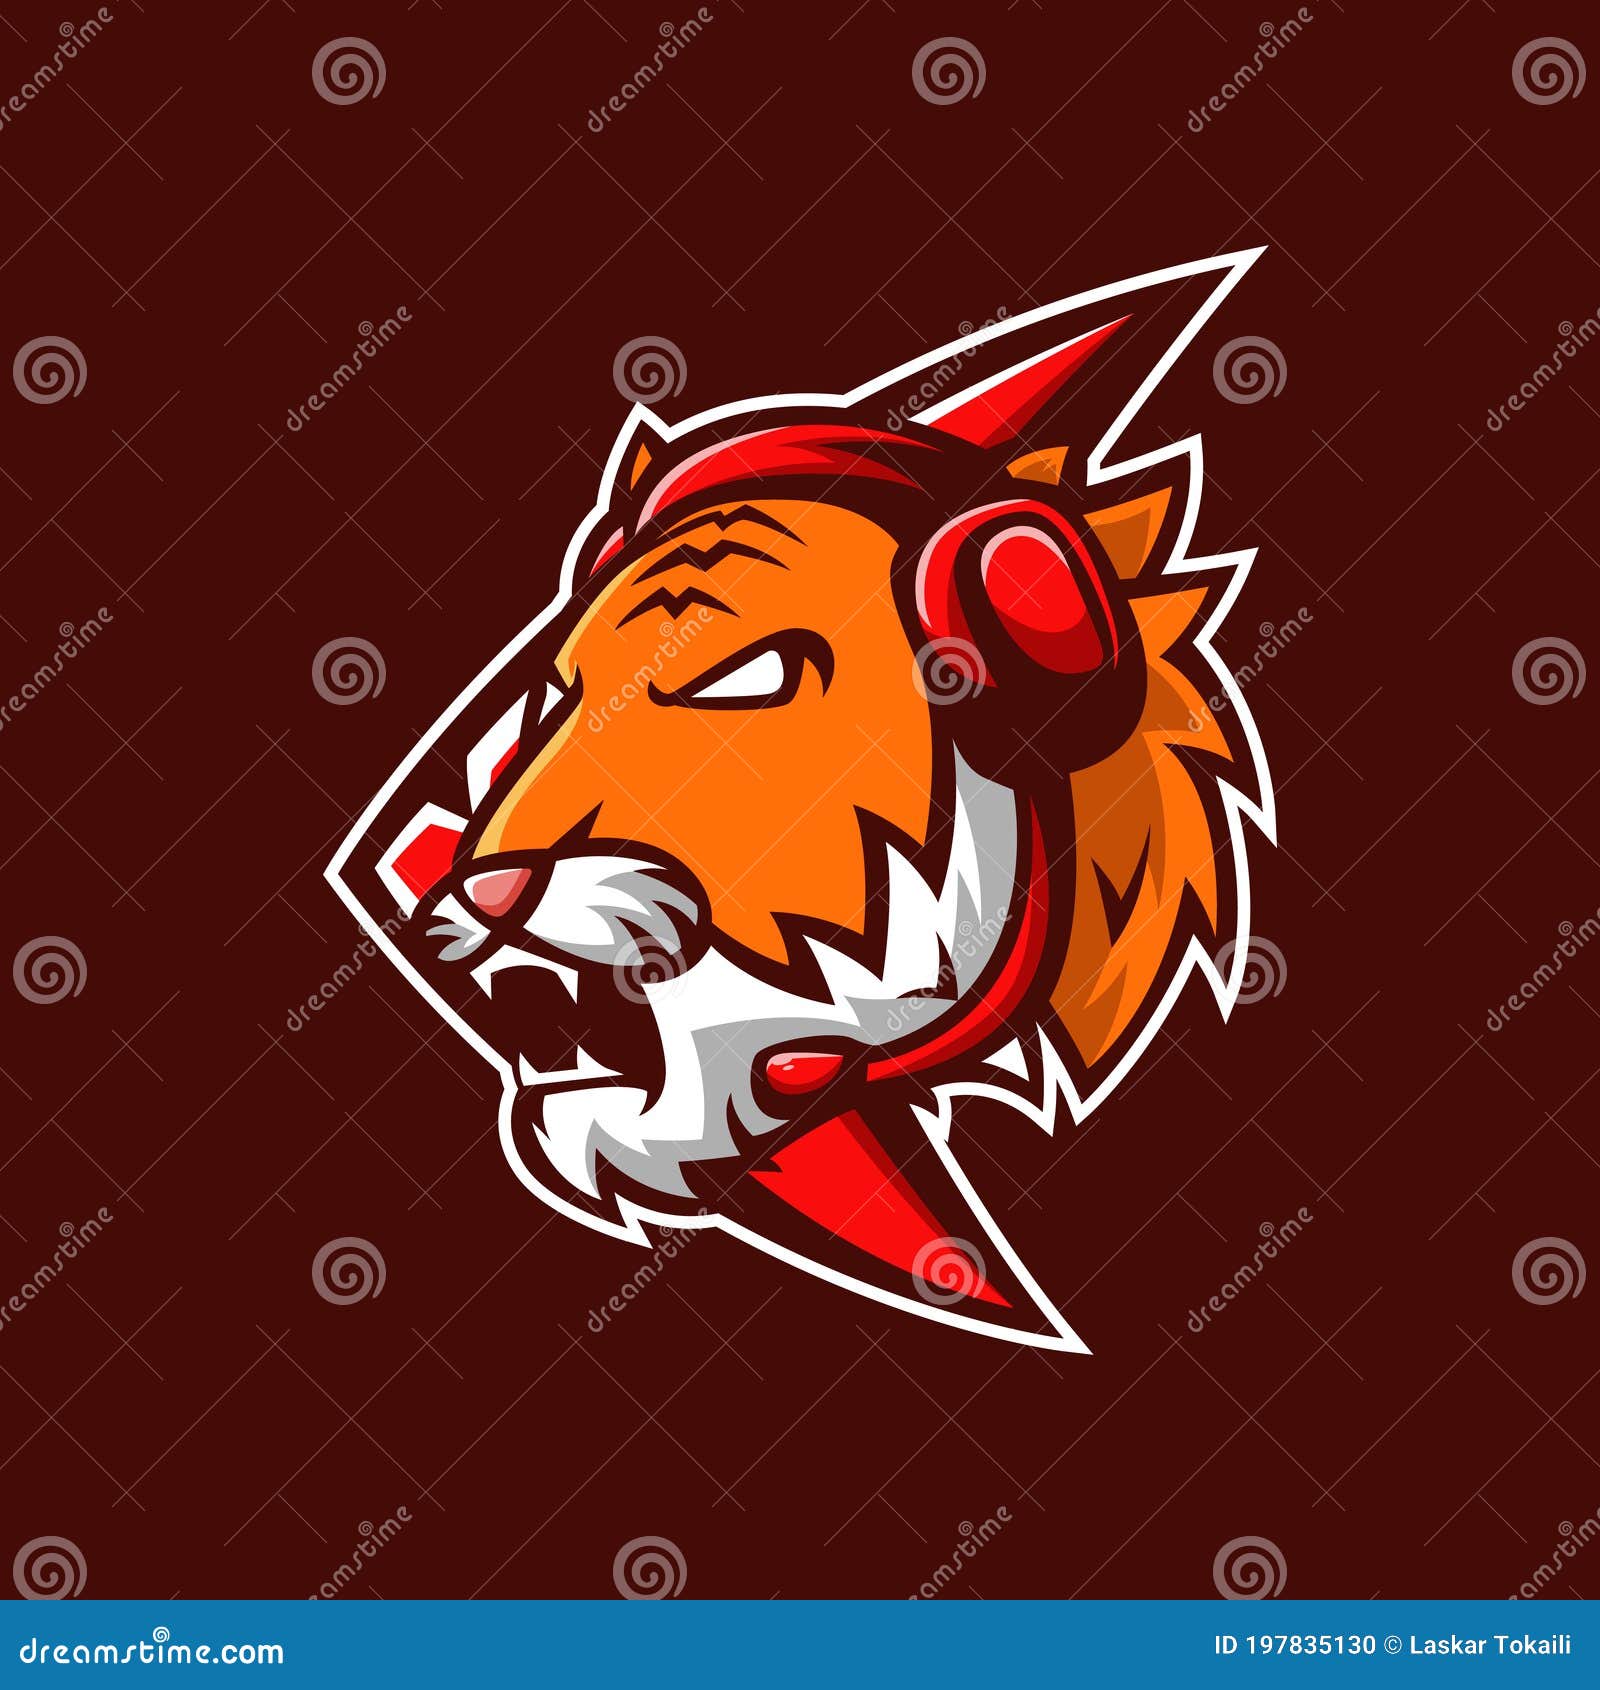 Mascot Logo Tiger Head Esport with Emblem and Headphone in Brown Background  Stock Vector - Illustration of crown, background: 197835130